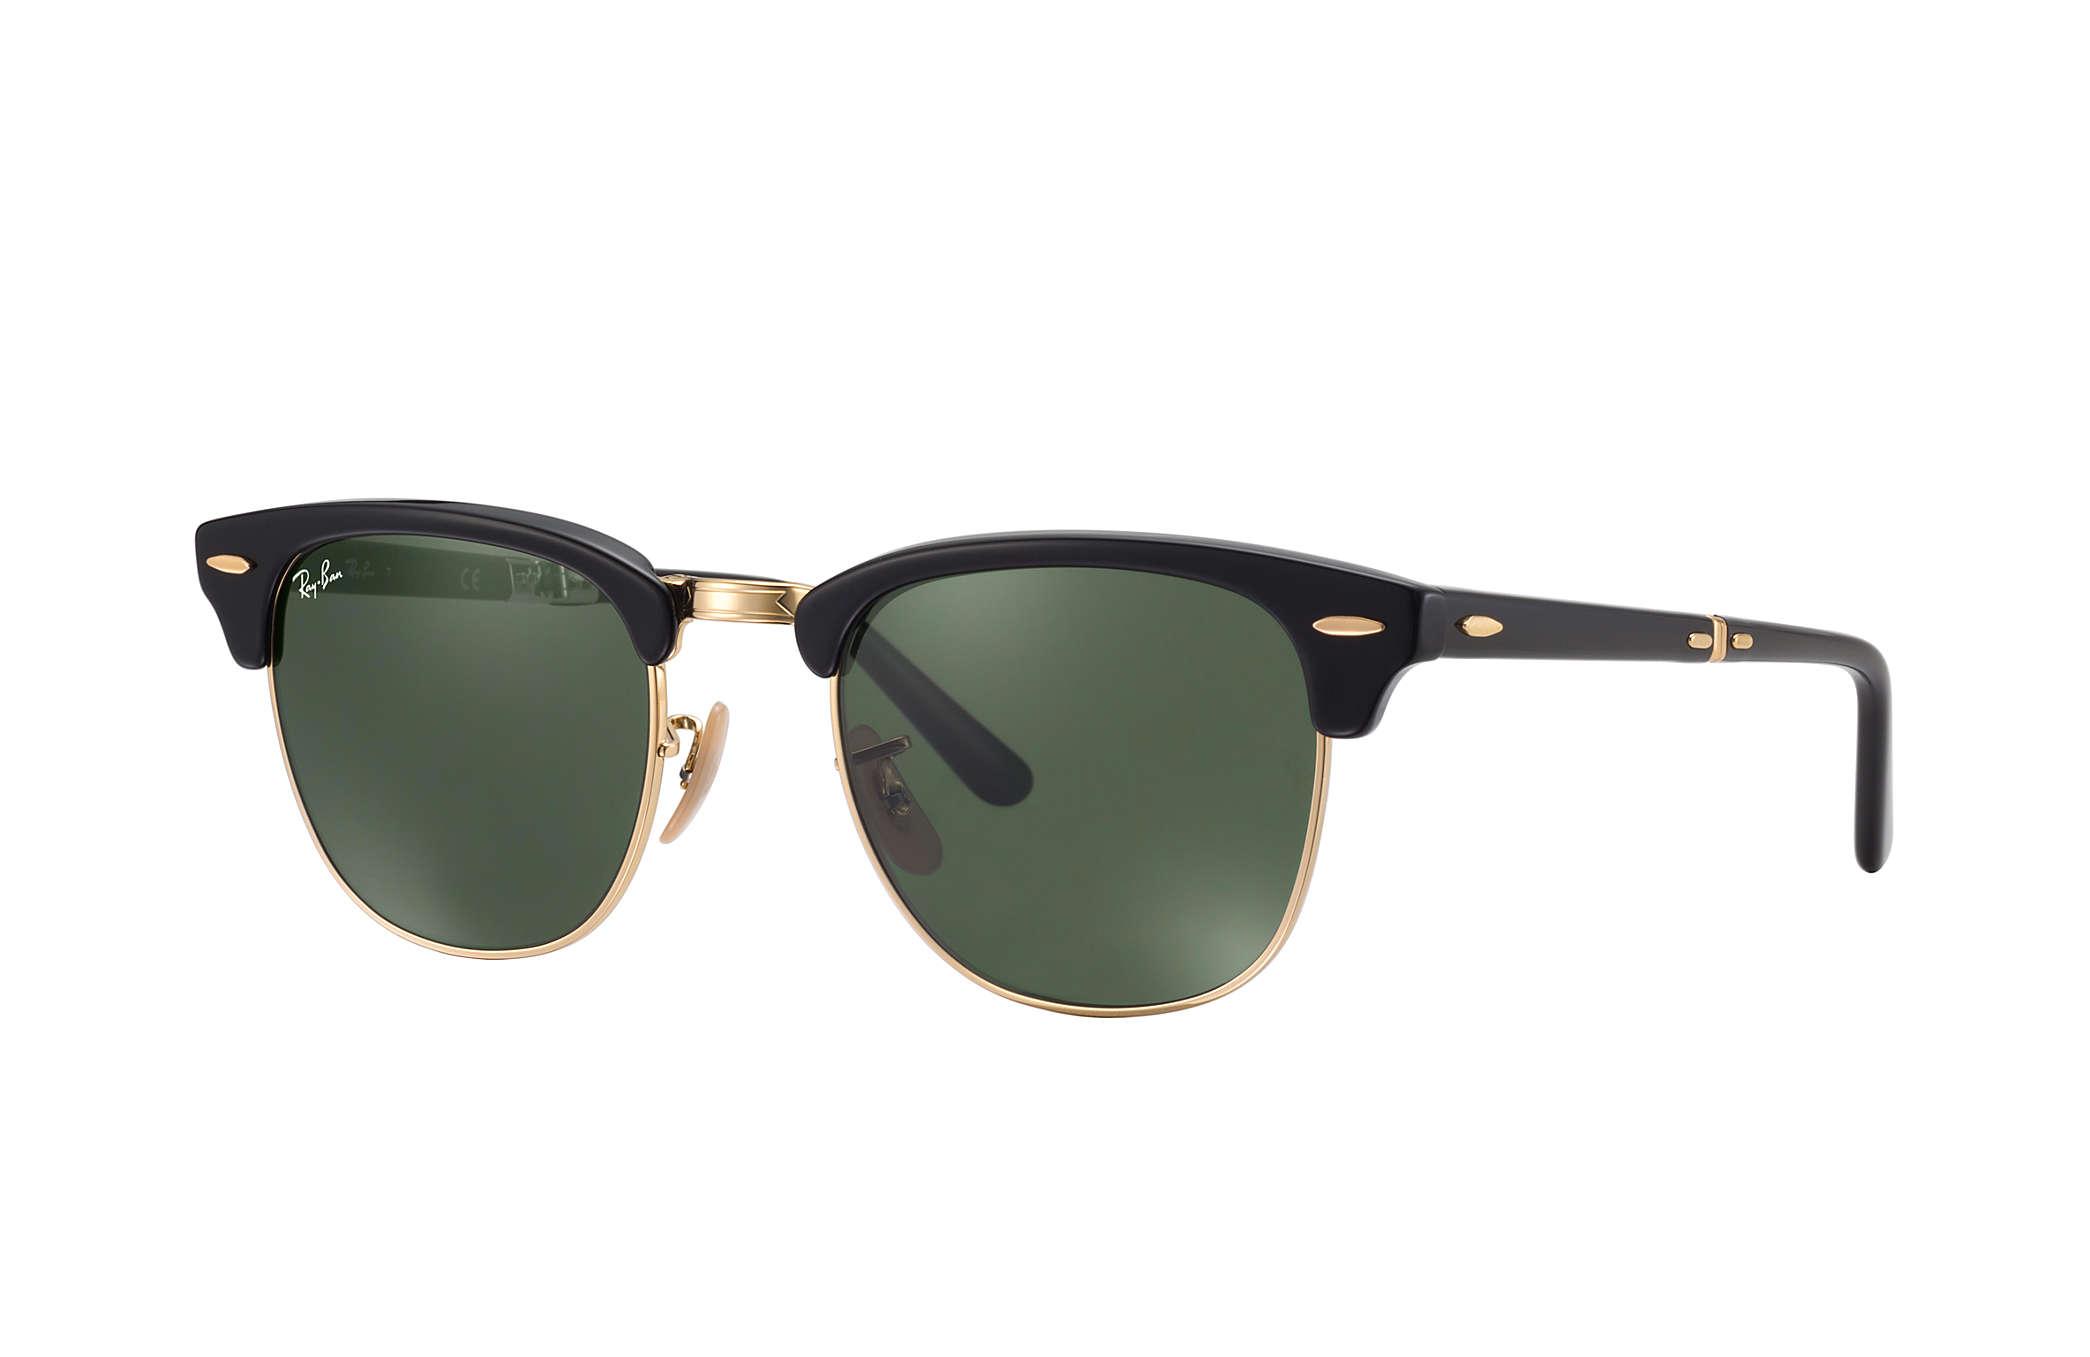 Ray-Ban Sunglasses, Rb2176 Clubmaster Folding in Black/Green (Black) - Lyst